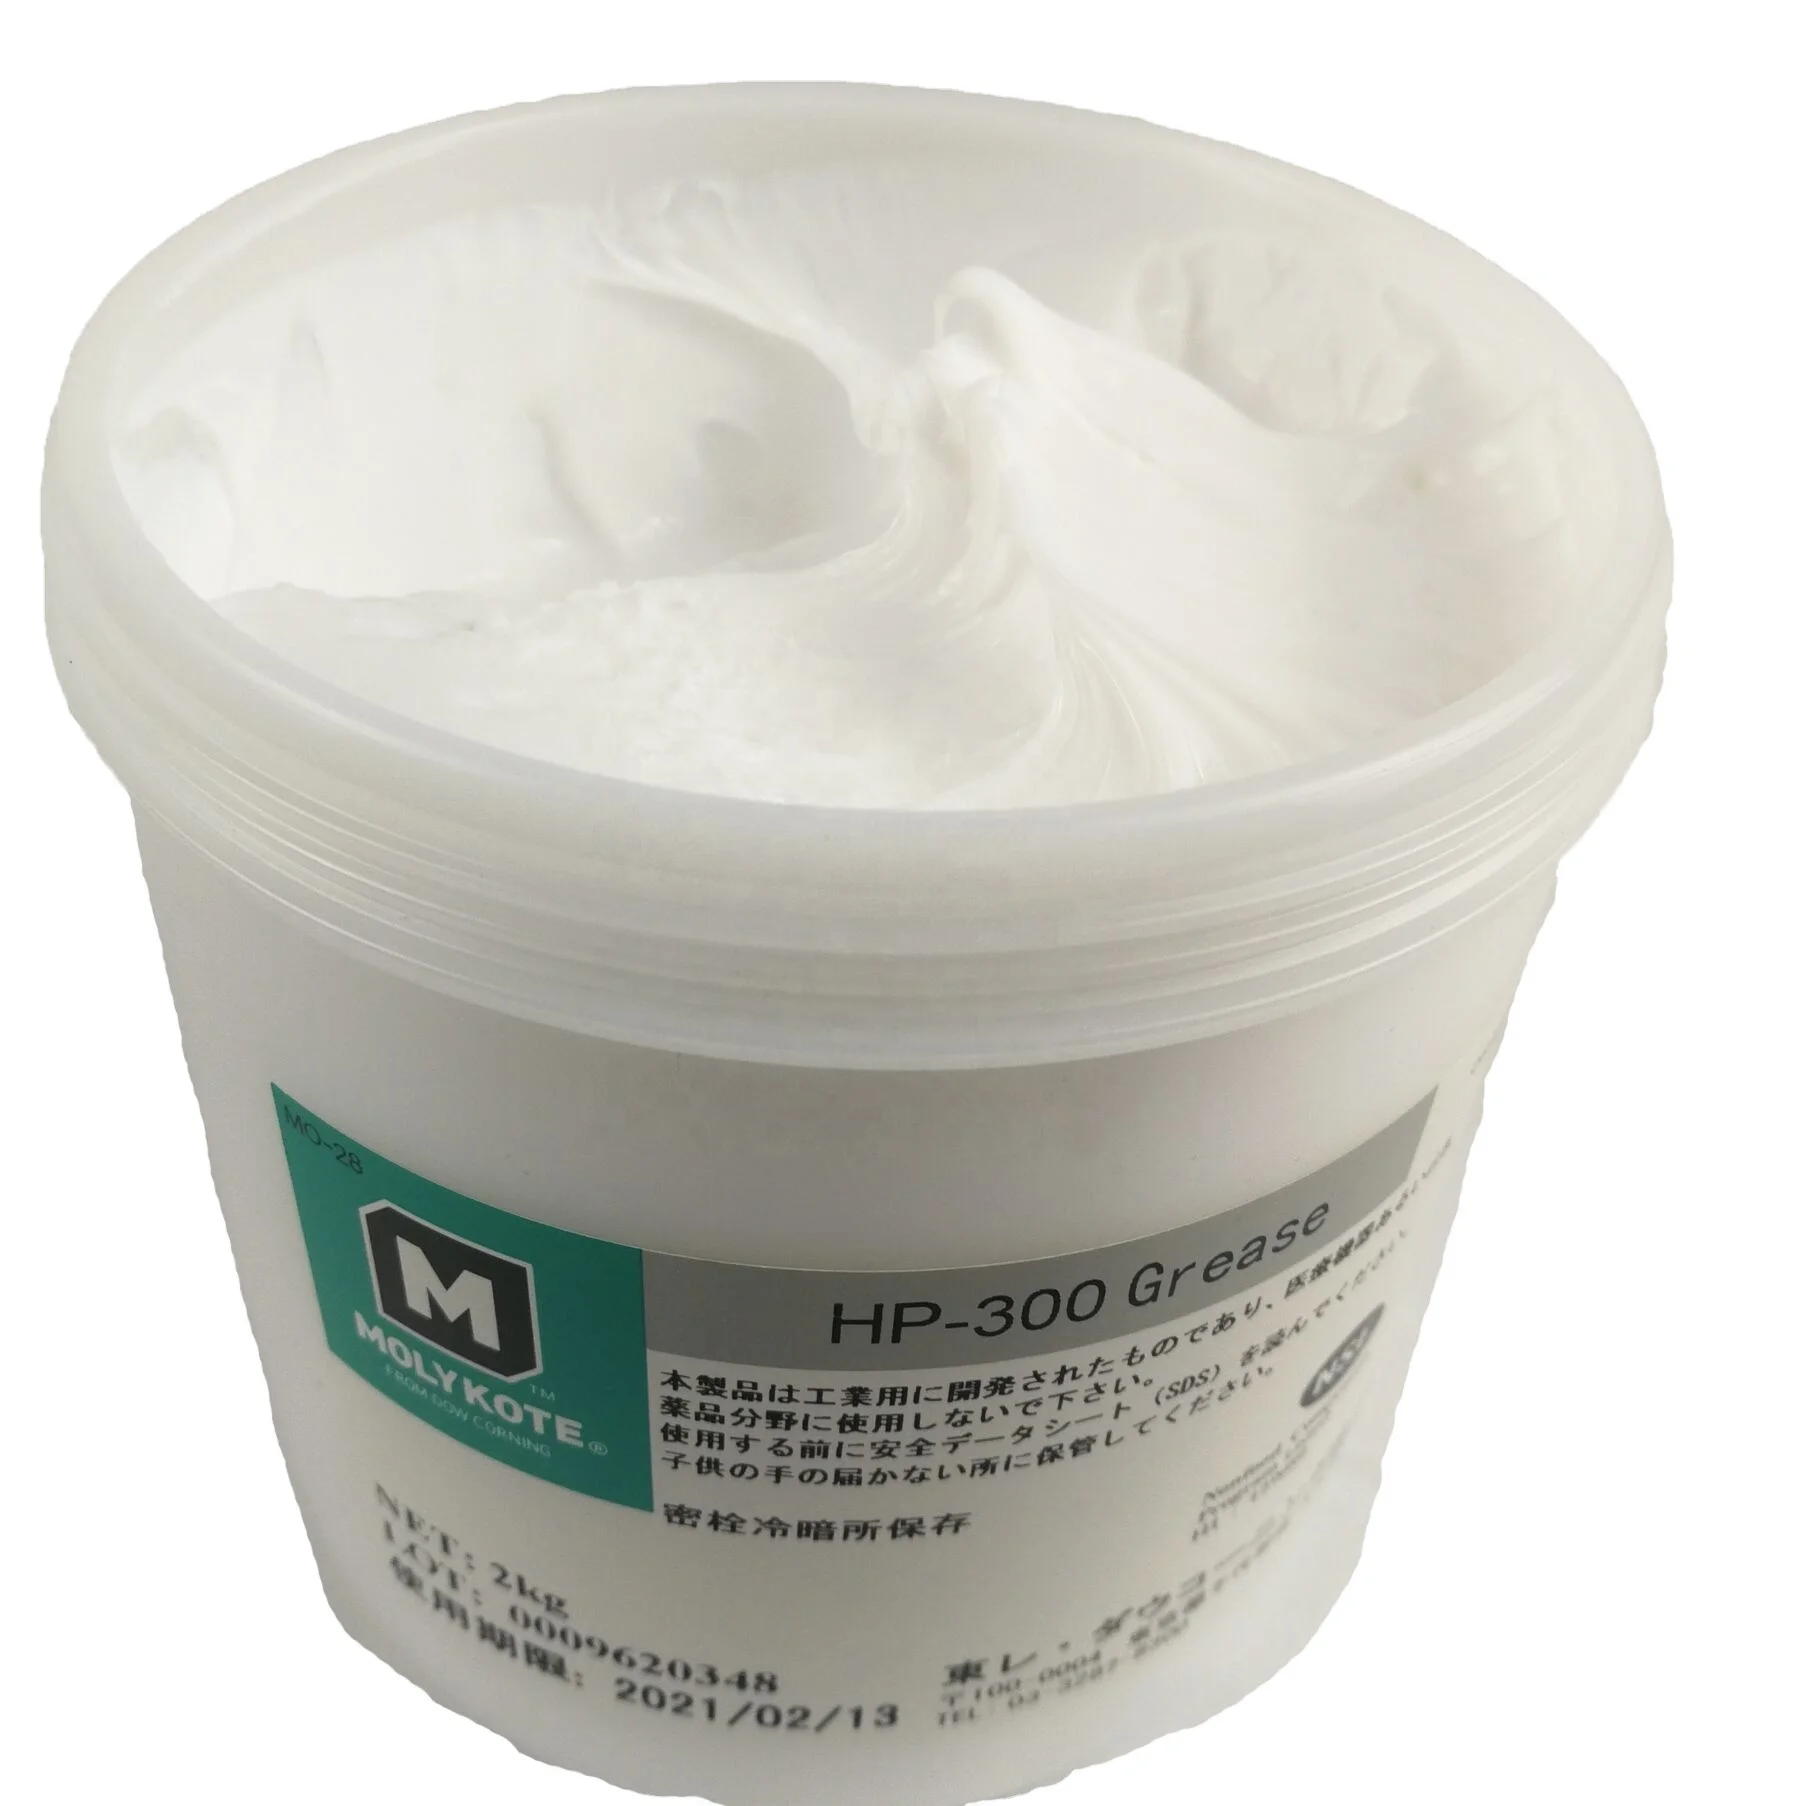 
ZHHP Original Molykote For HP 300 Grease for high speed printer Fuser Film Grease 500G  (1600145193600)